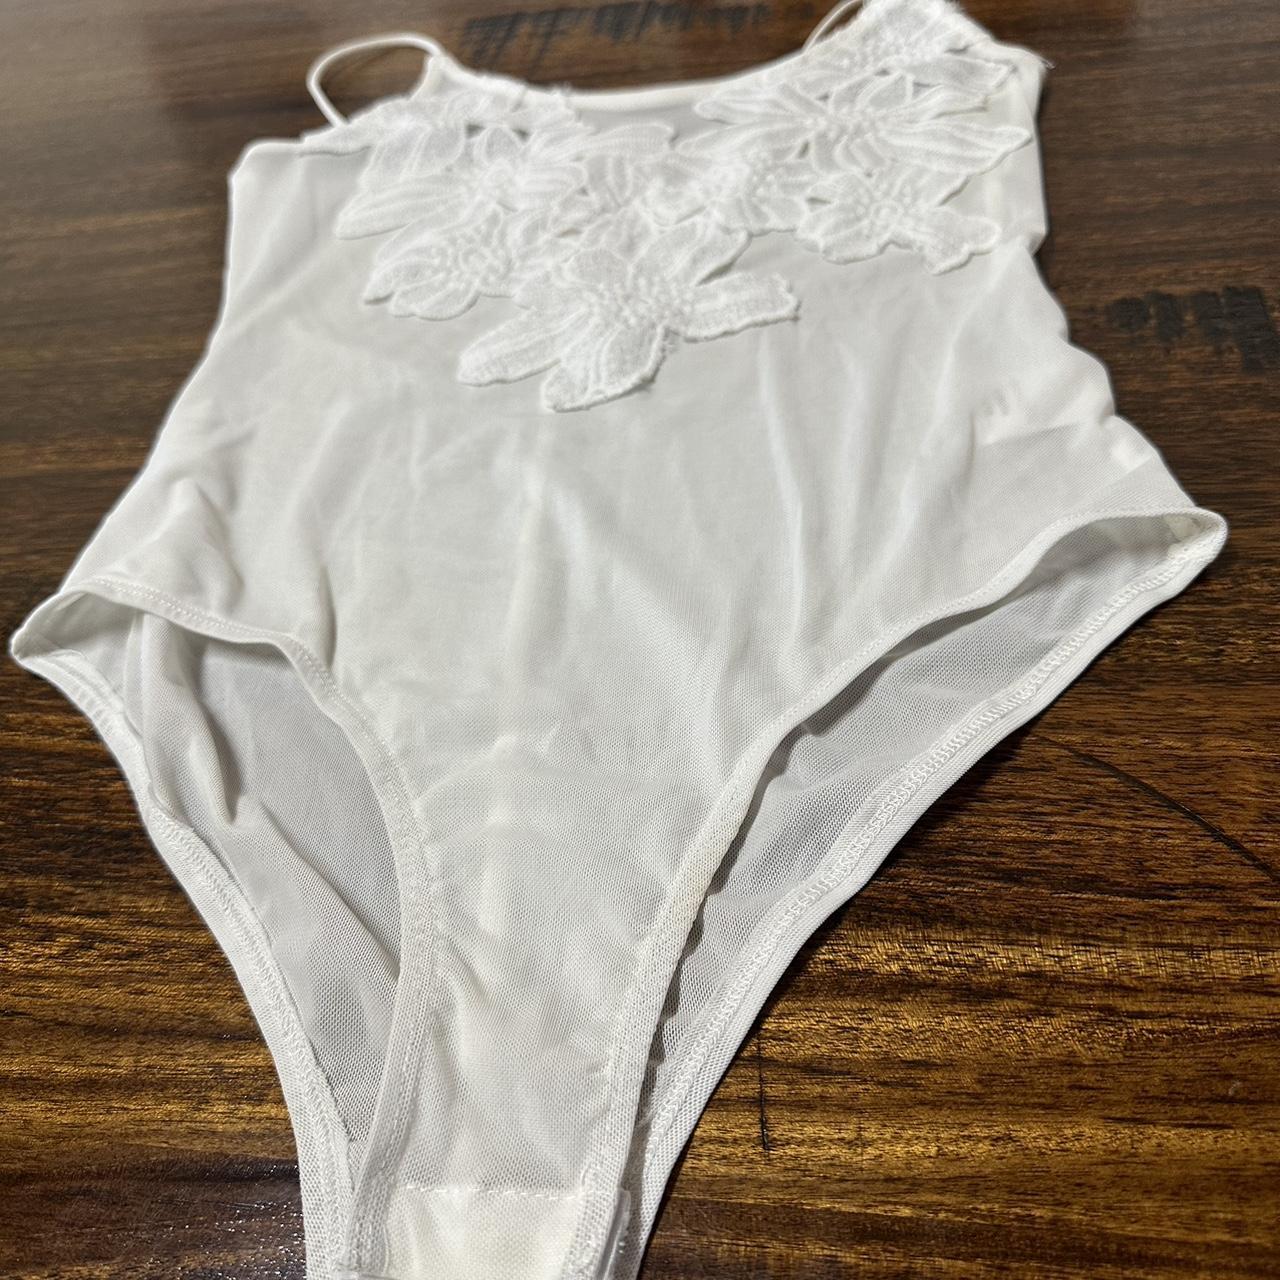 White floral see through lace body suit - Depop